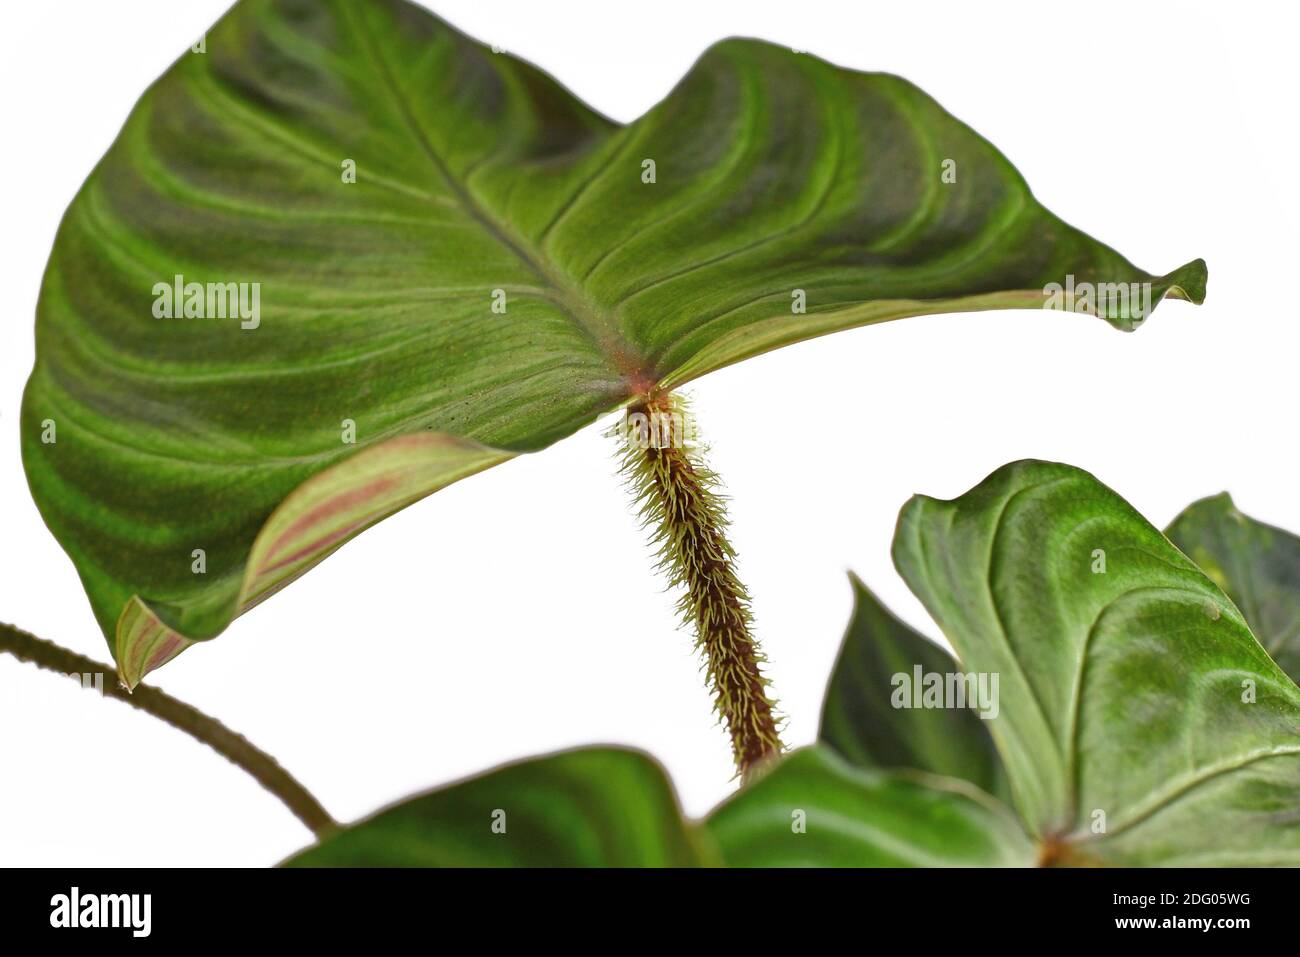 Close up of hairy petiole of tropical 'Philodendron Verrucosum' houseplant with dark green veined velvety leaves isolated on white background Stock Photo